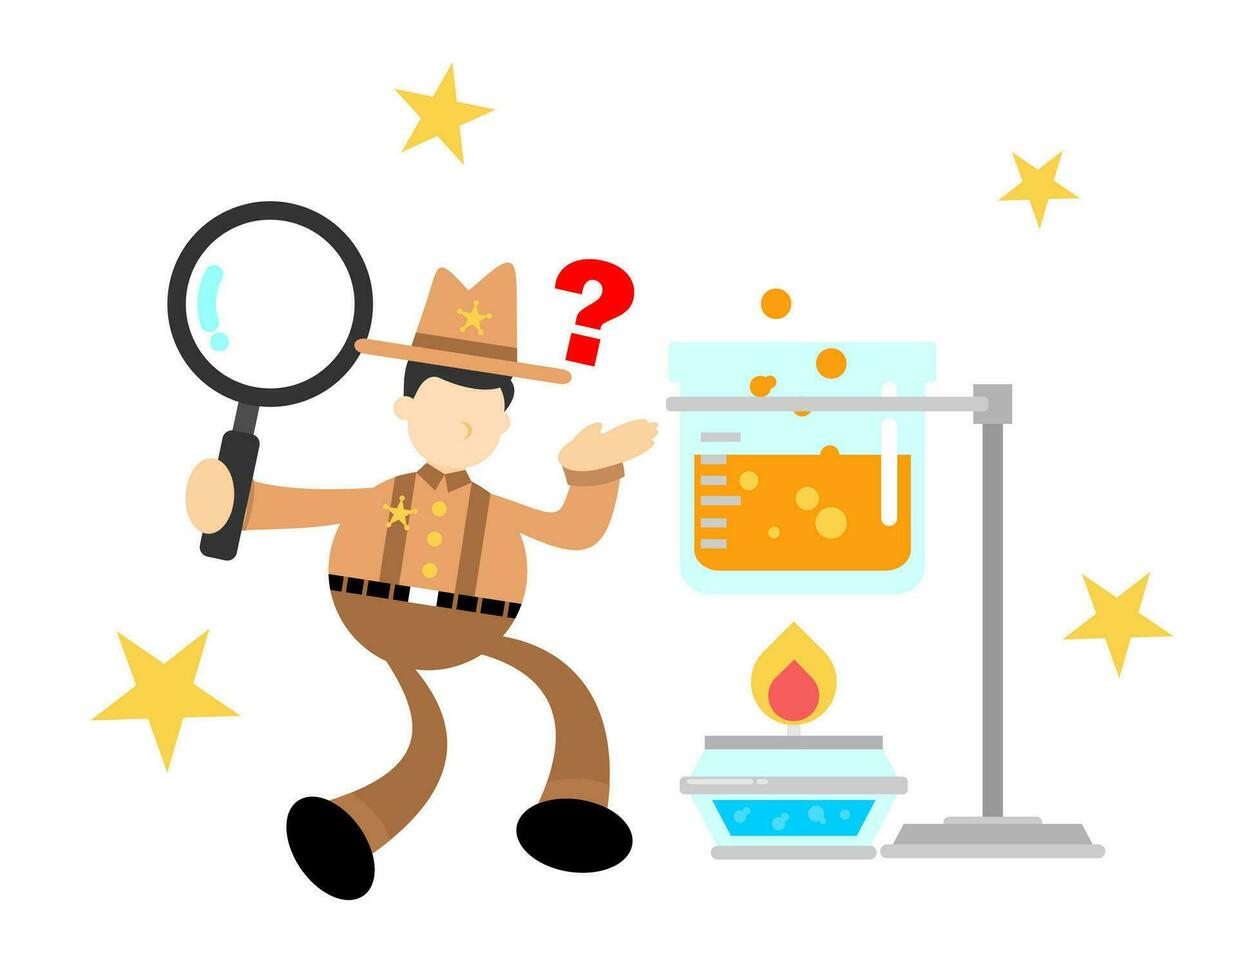 cowboy america and experiment laboratory flask research science cartoon doodle flat design style vector illustration